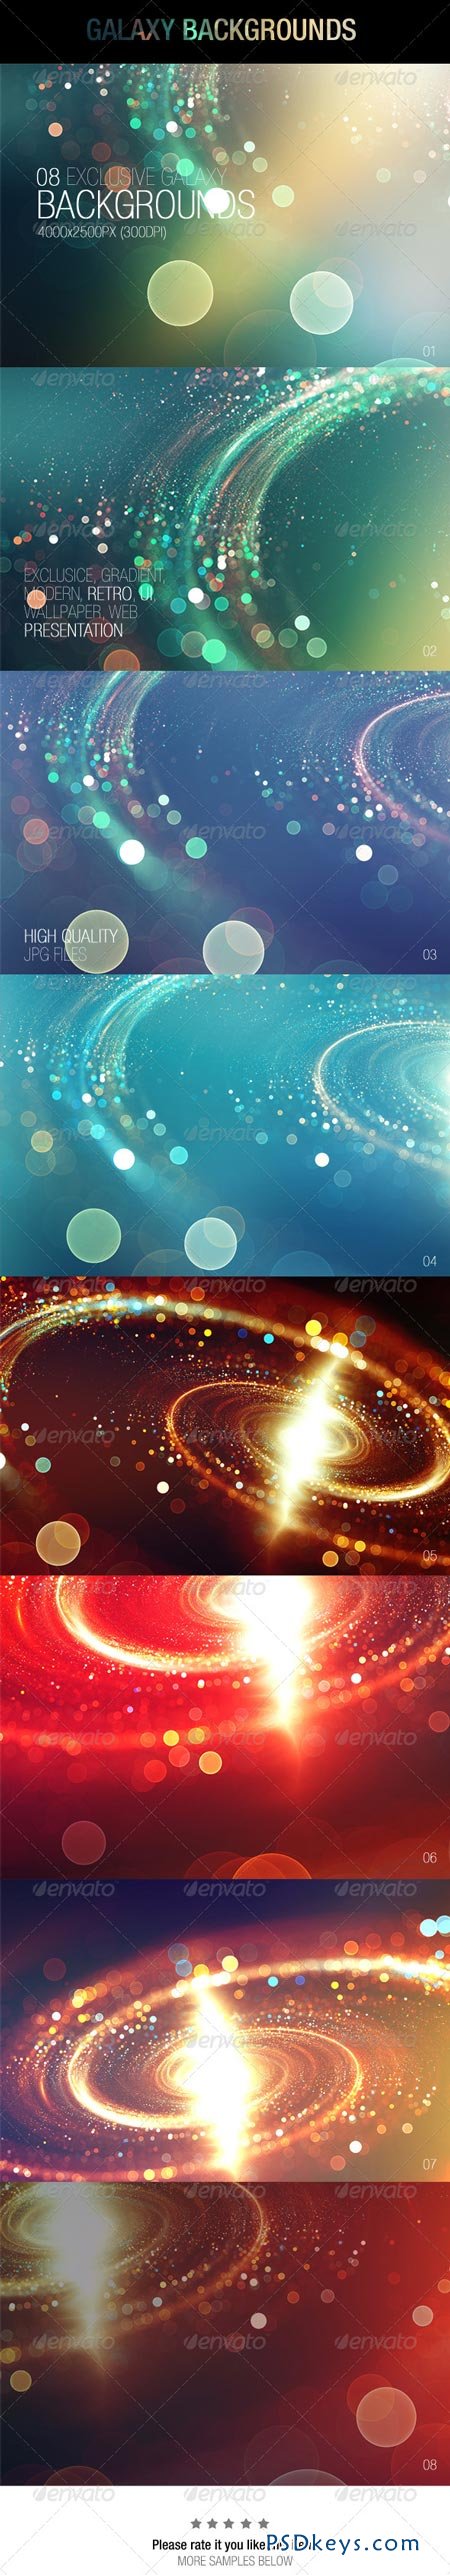 Galaxy Backgrounds 6839679